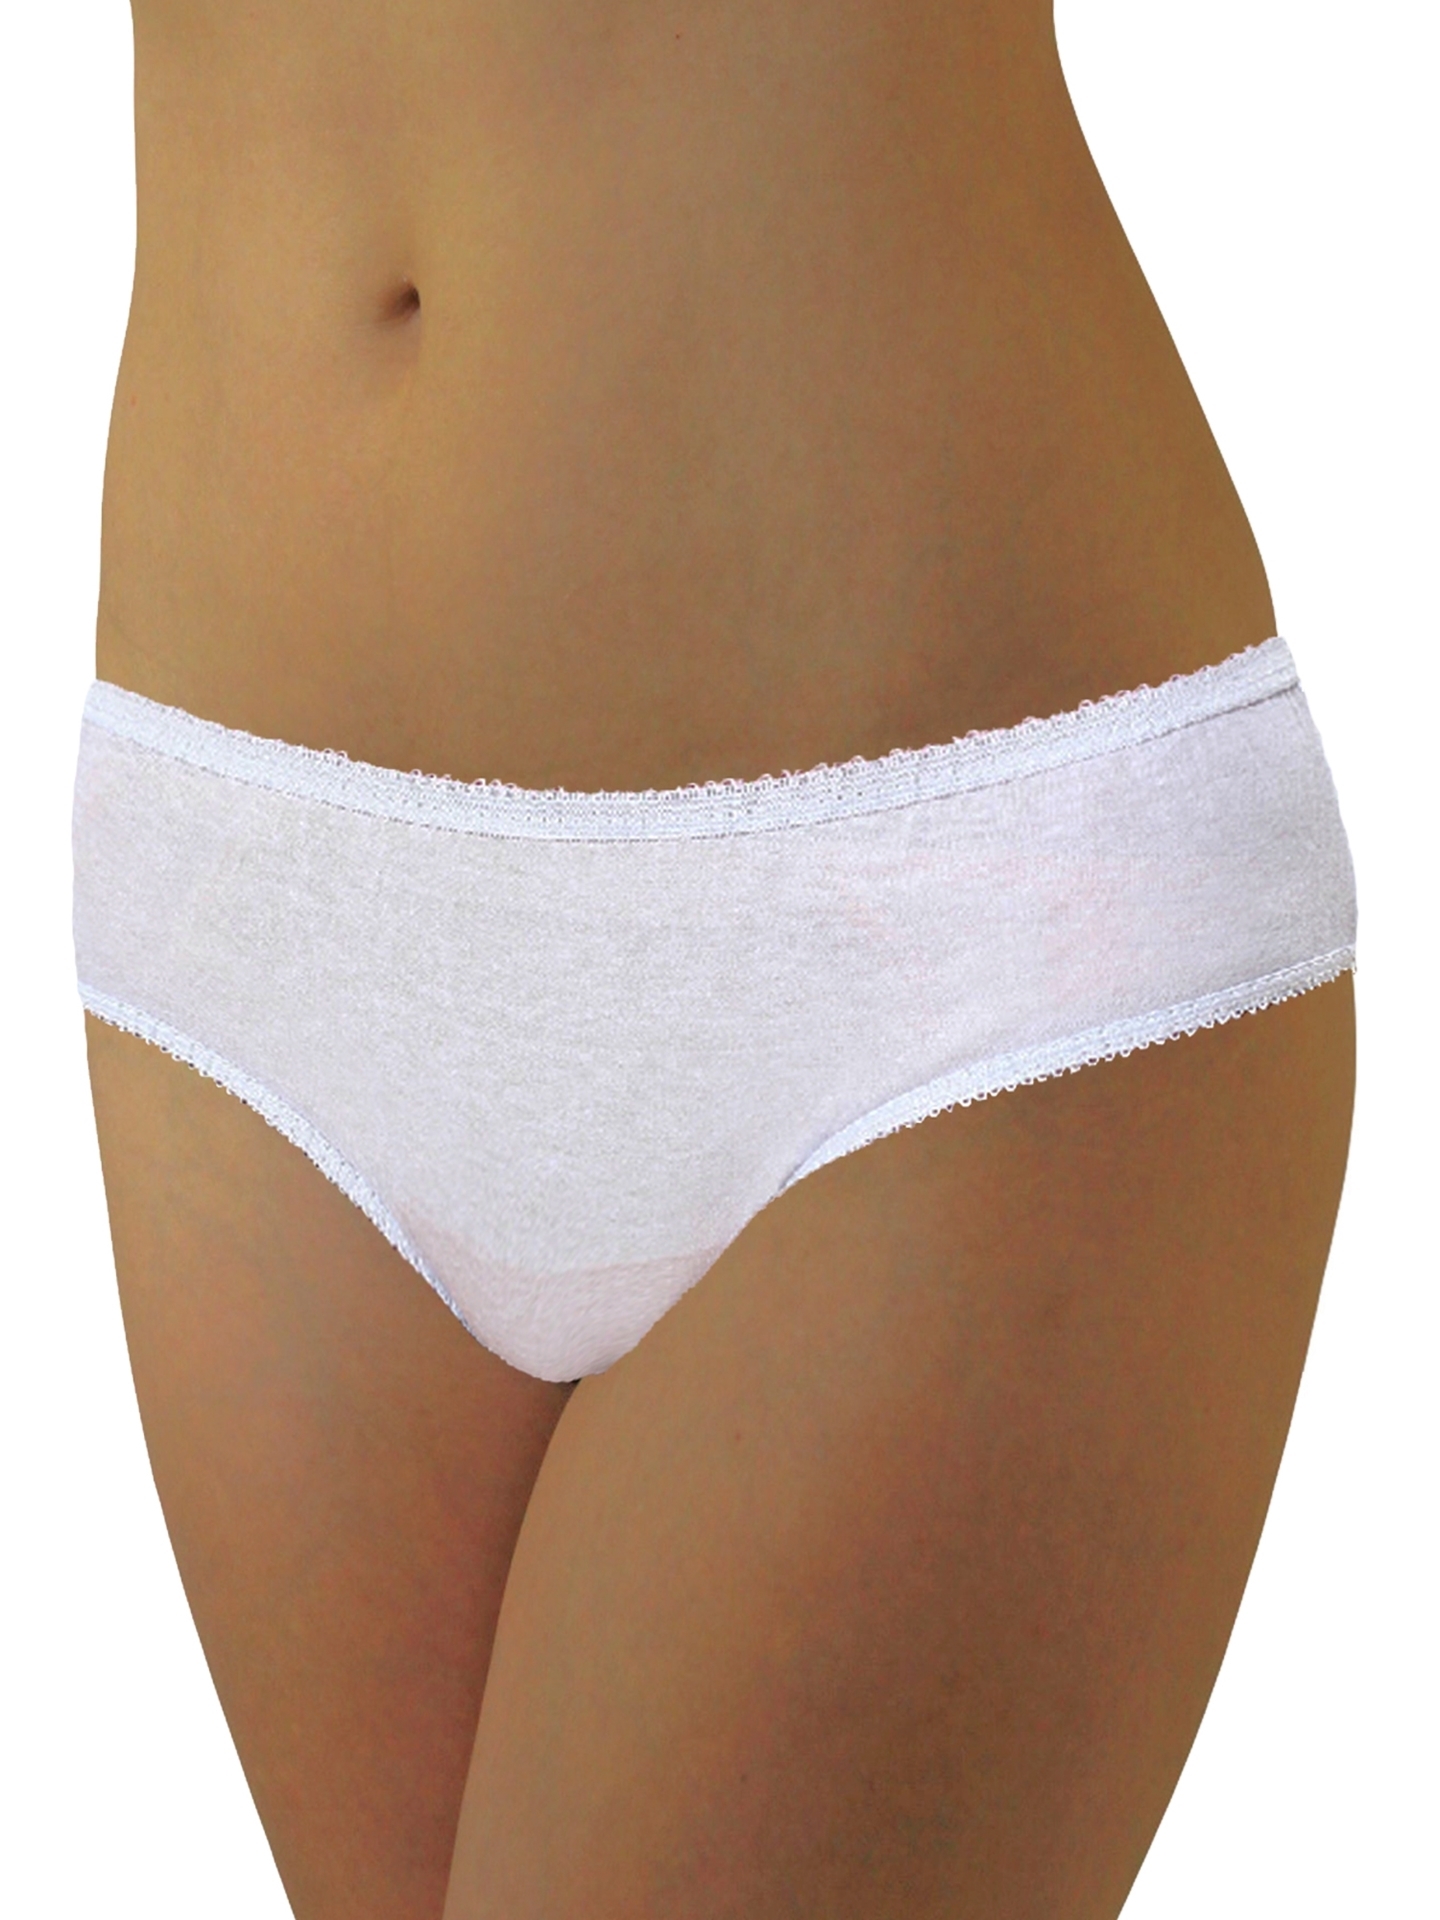 WOMENS DISPOSABLE 100% COTTON UNDERWEAR - FOR TRAVEL- HOSPITAL STAYS-  EMERGENCIES 10-PACK